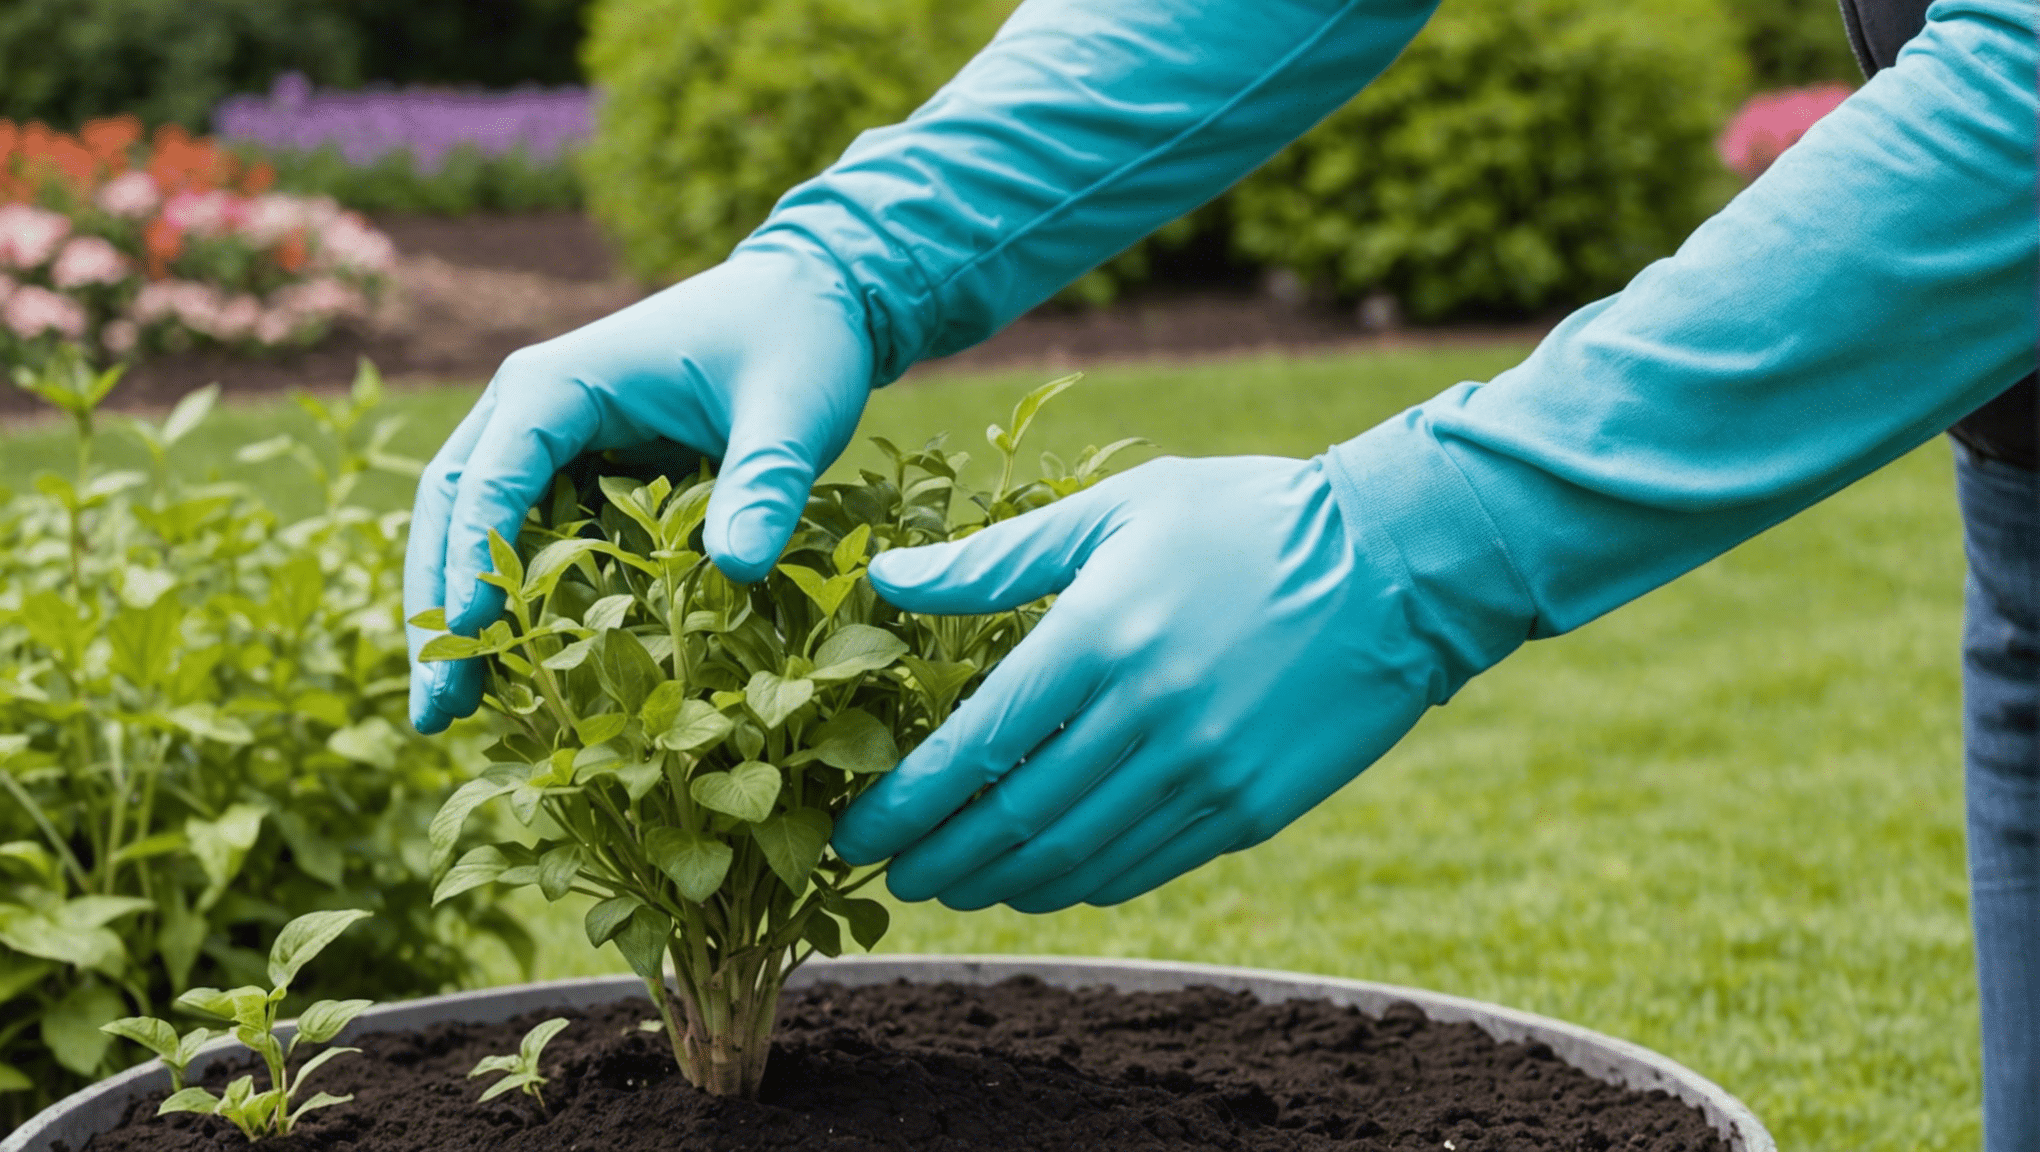 discover the comprehensive review of gardening sleeves and find out if they are worth it.